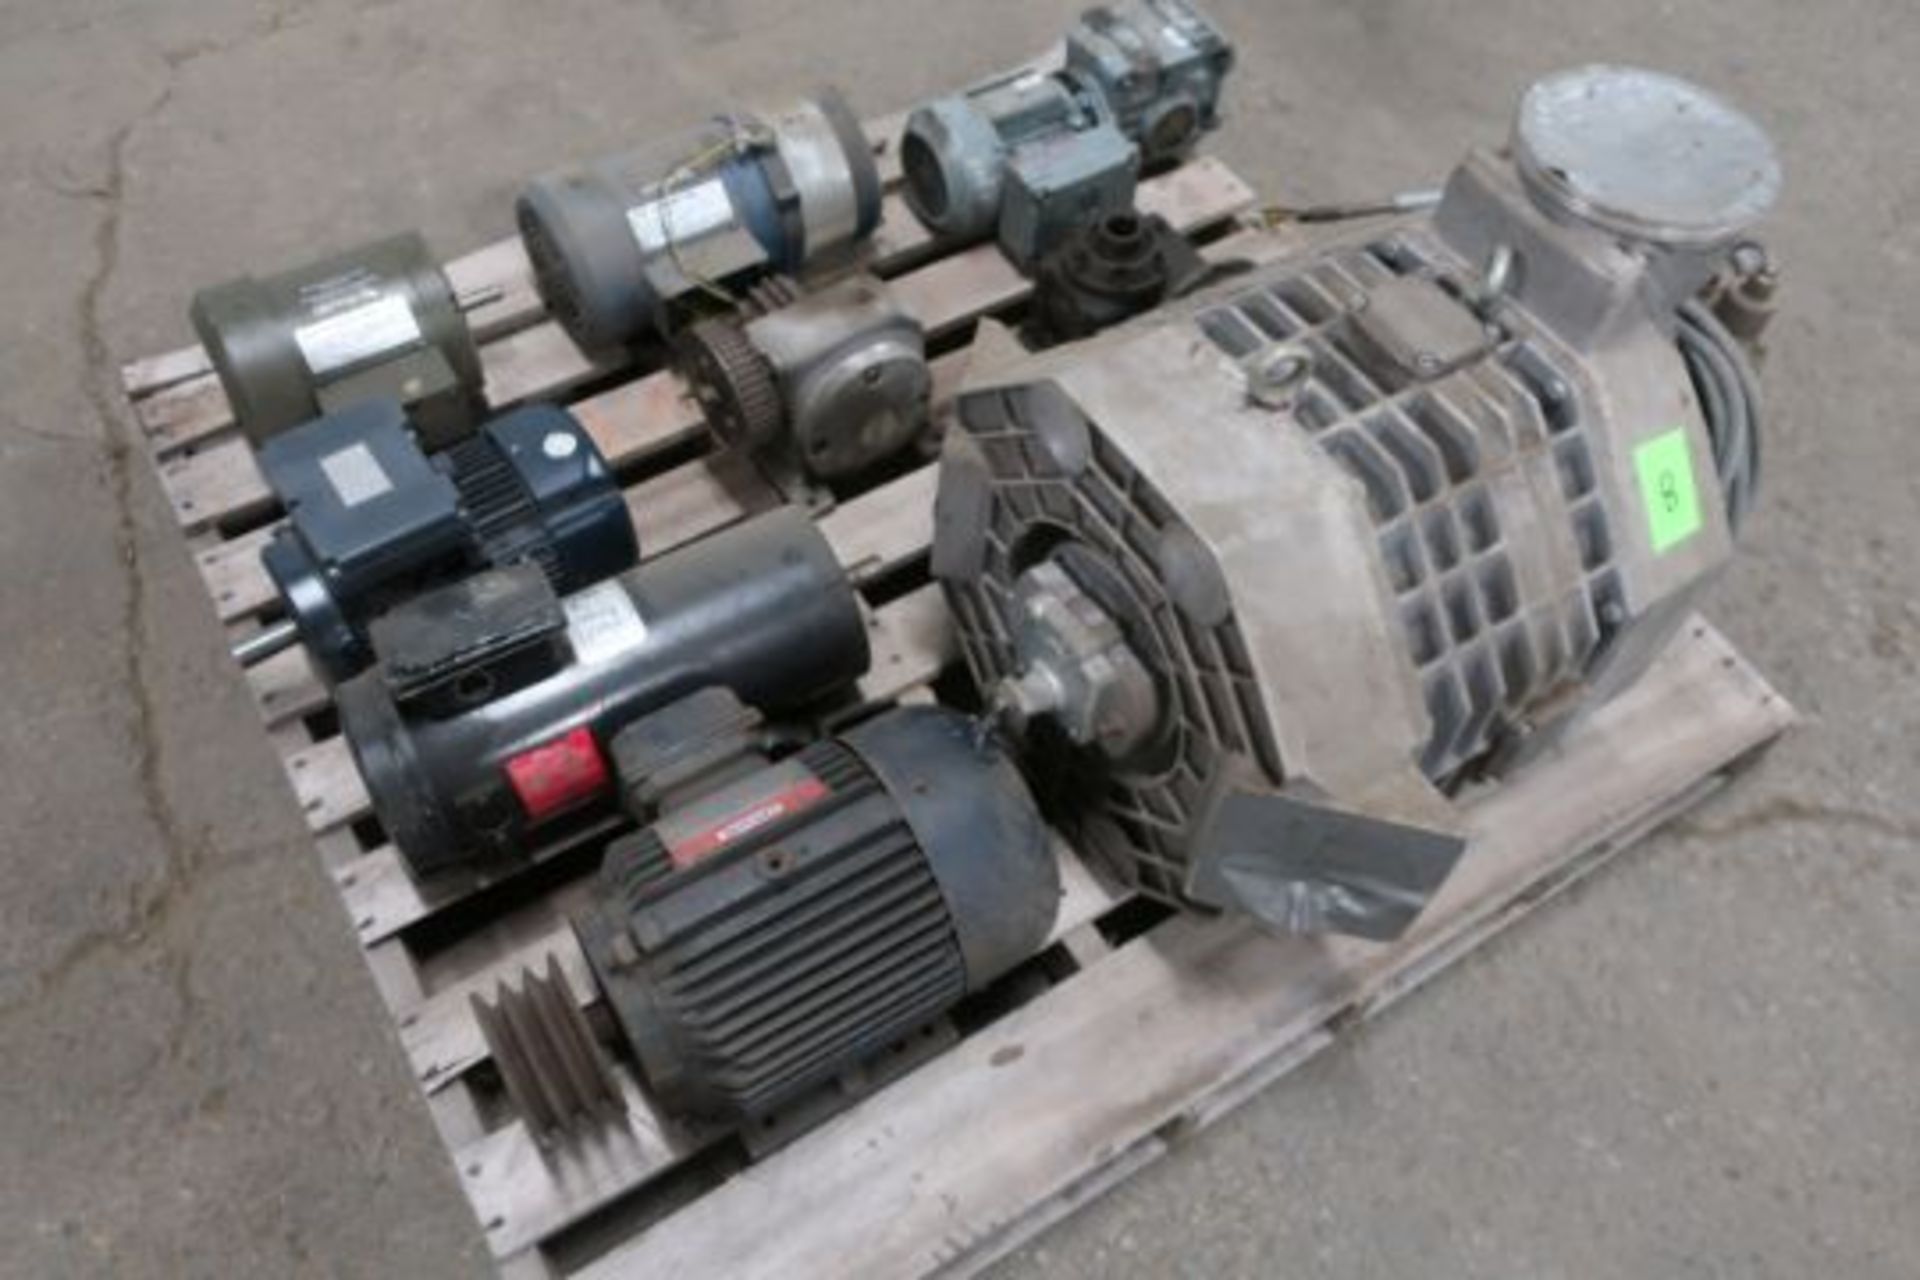 Lot of 8 (8 units) Electrical Motors and Gears